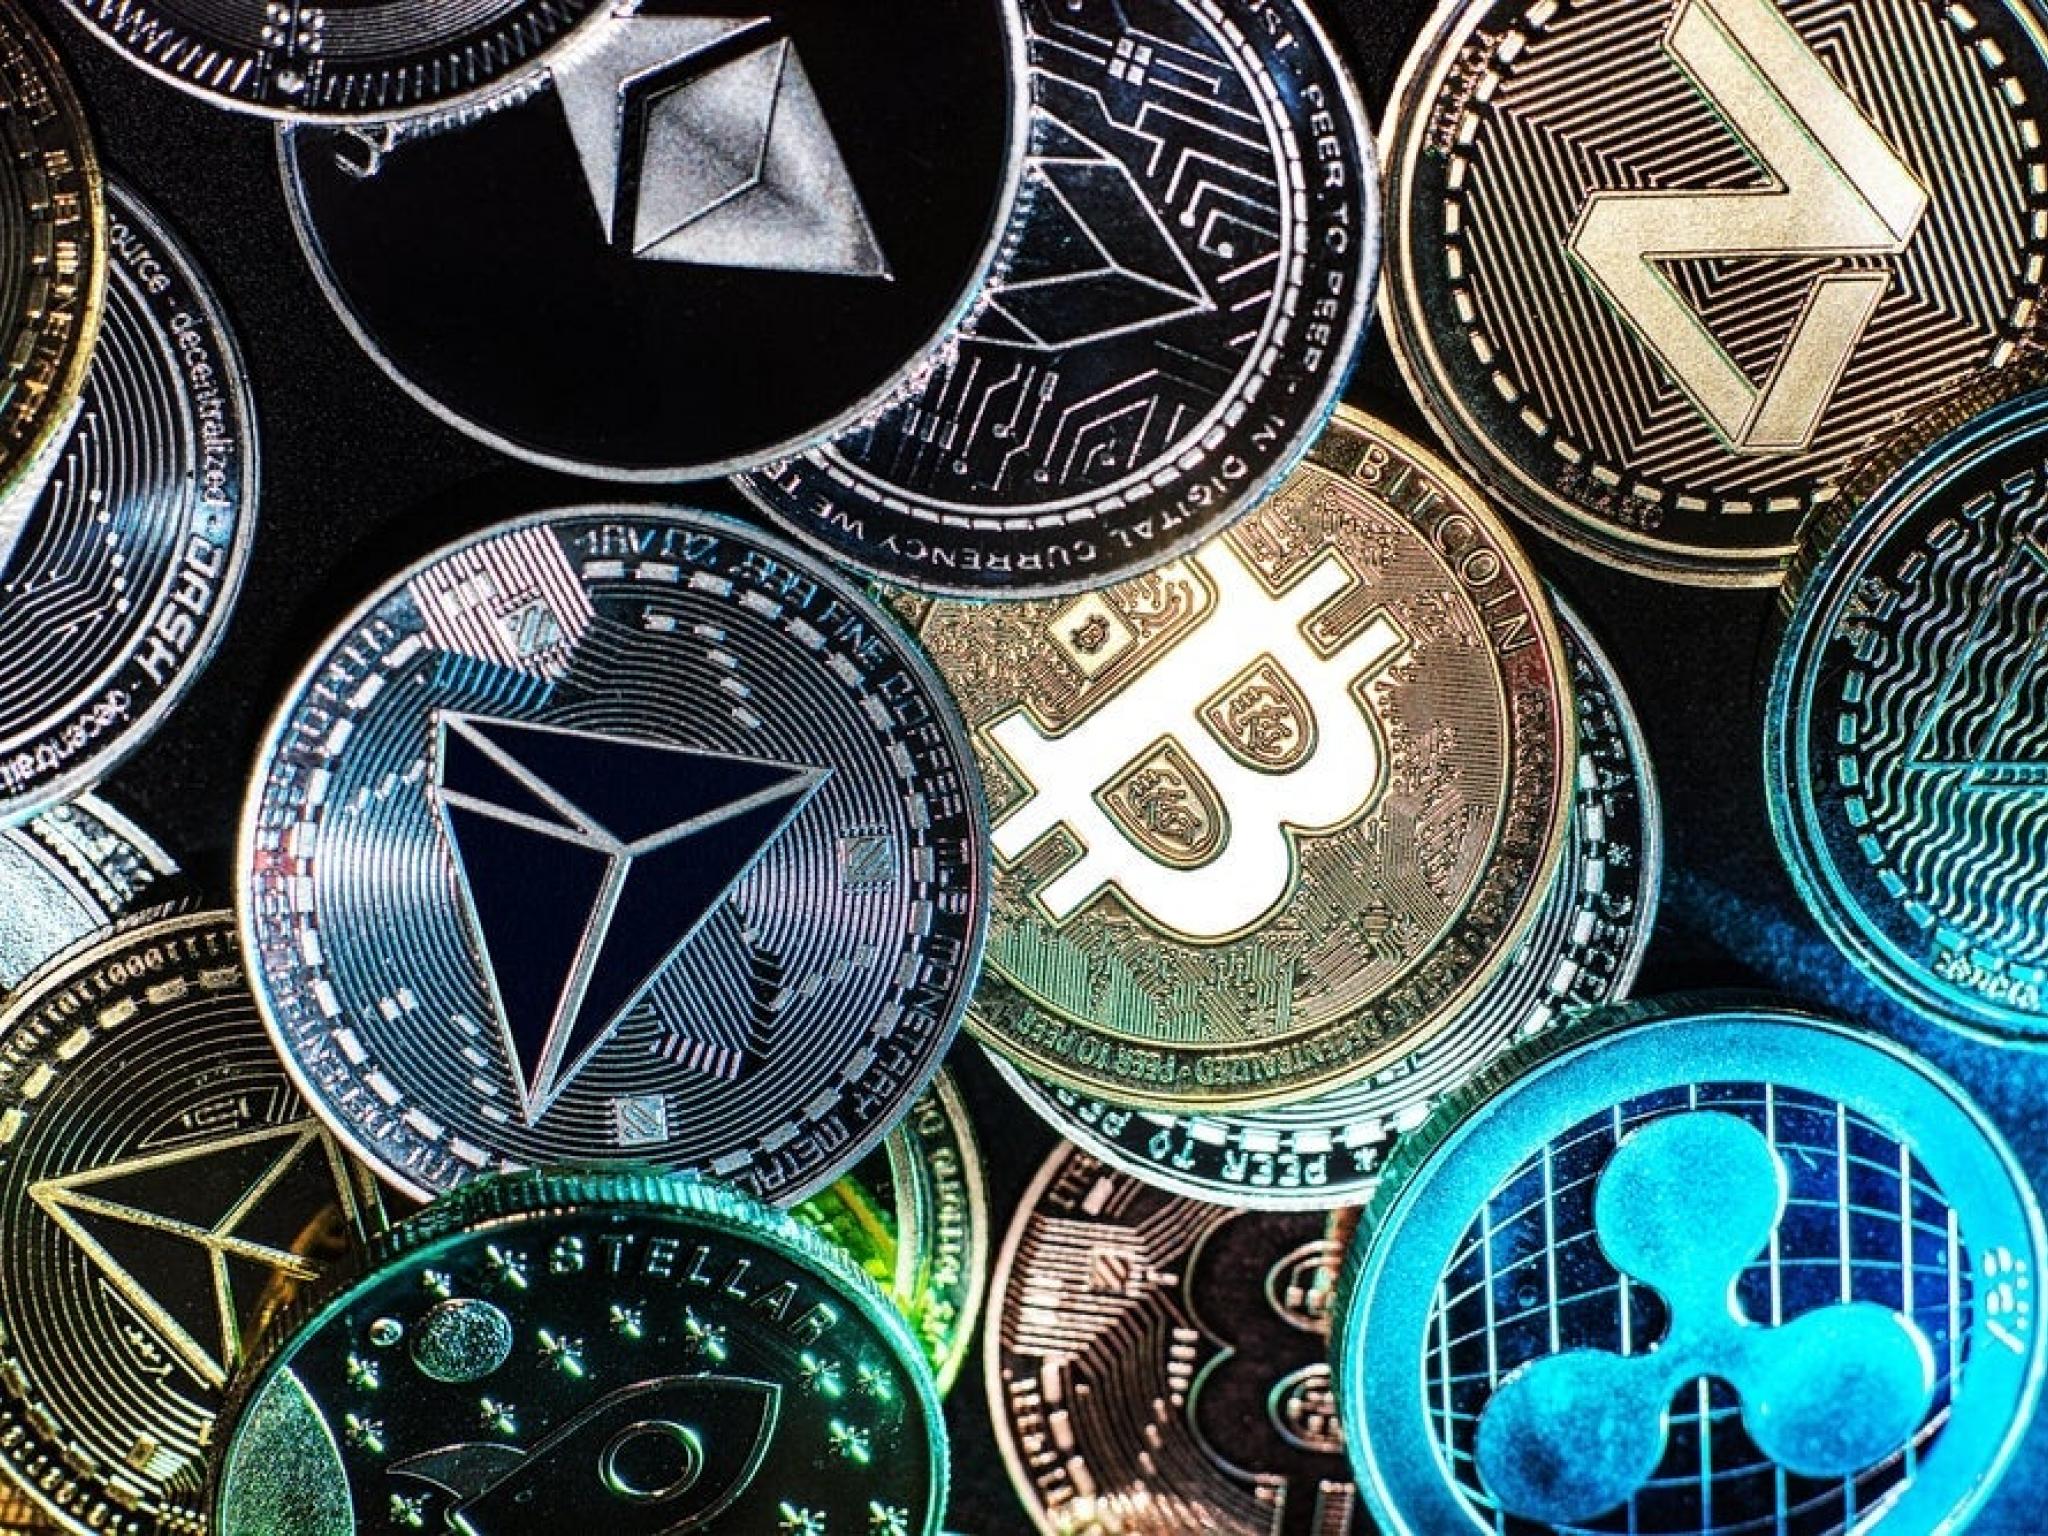  bitcoin-ethereum-etf-could-make-june-a-really-good-month-for-altcoins-predicts-veteran-trader 